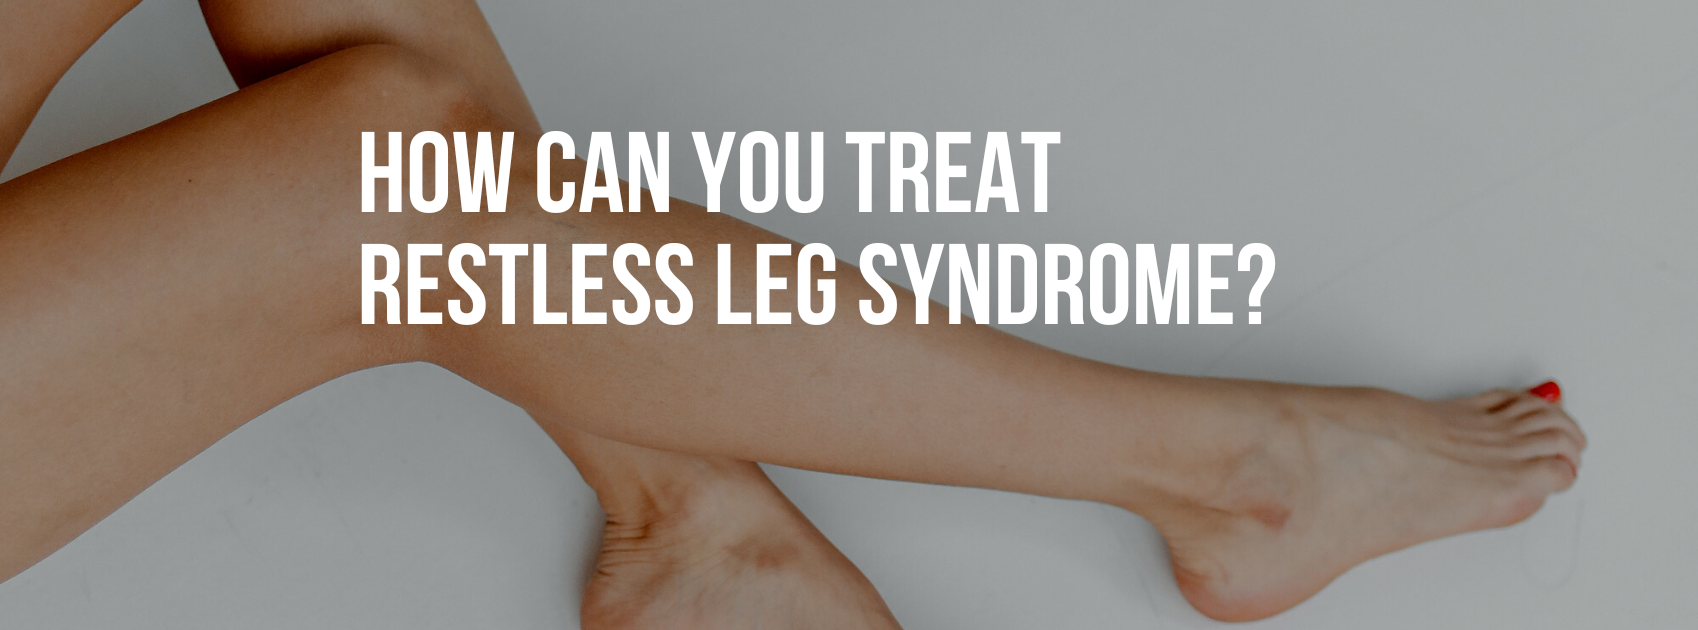 How Can You Treat Restless Leg Syndrome?